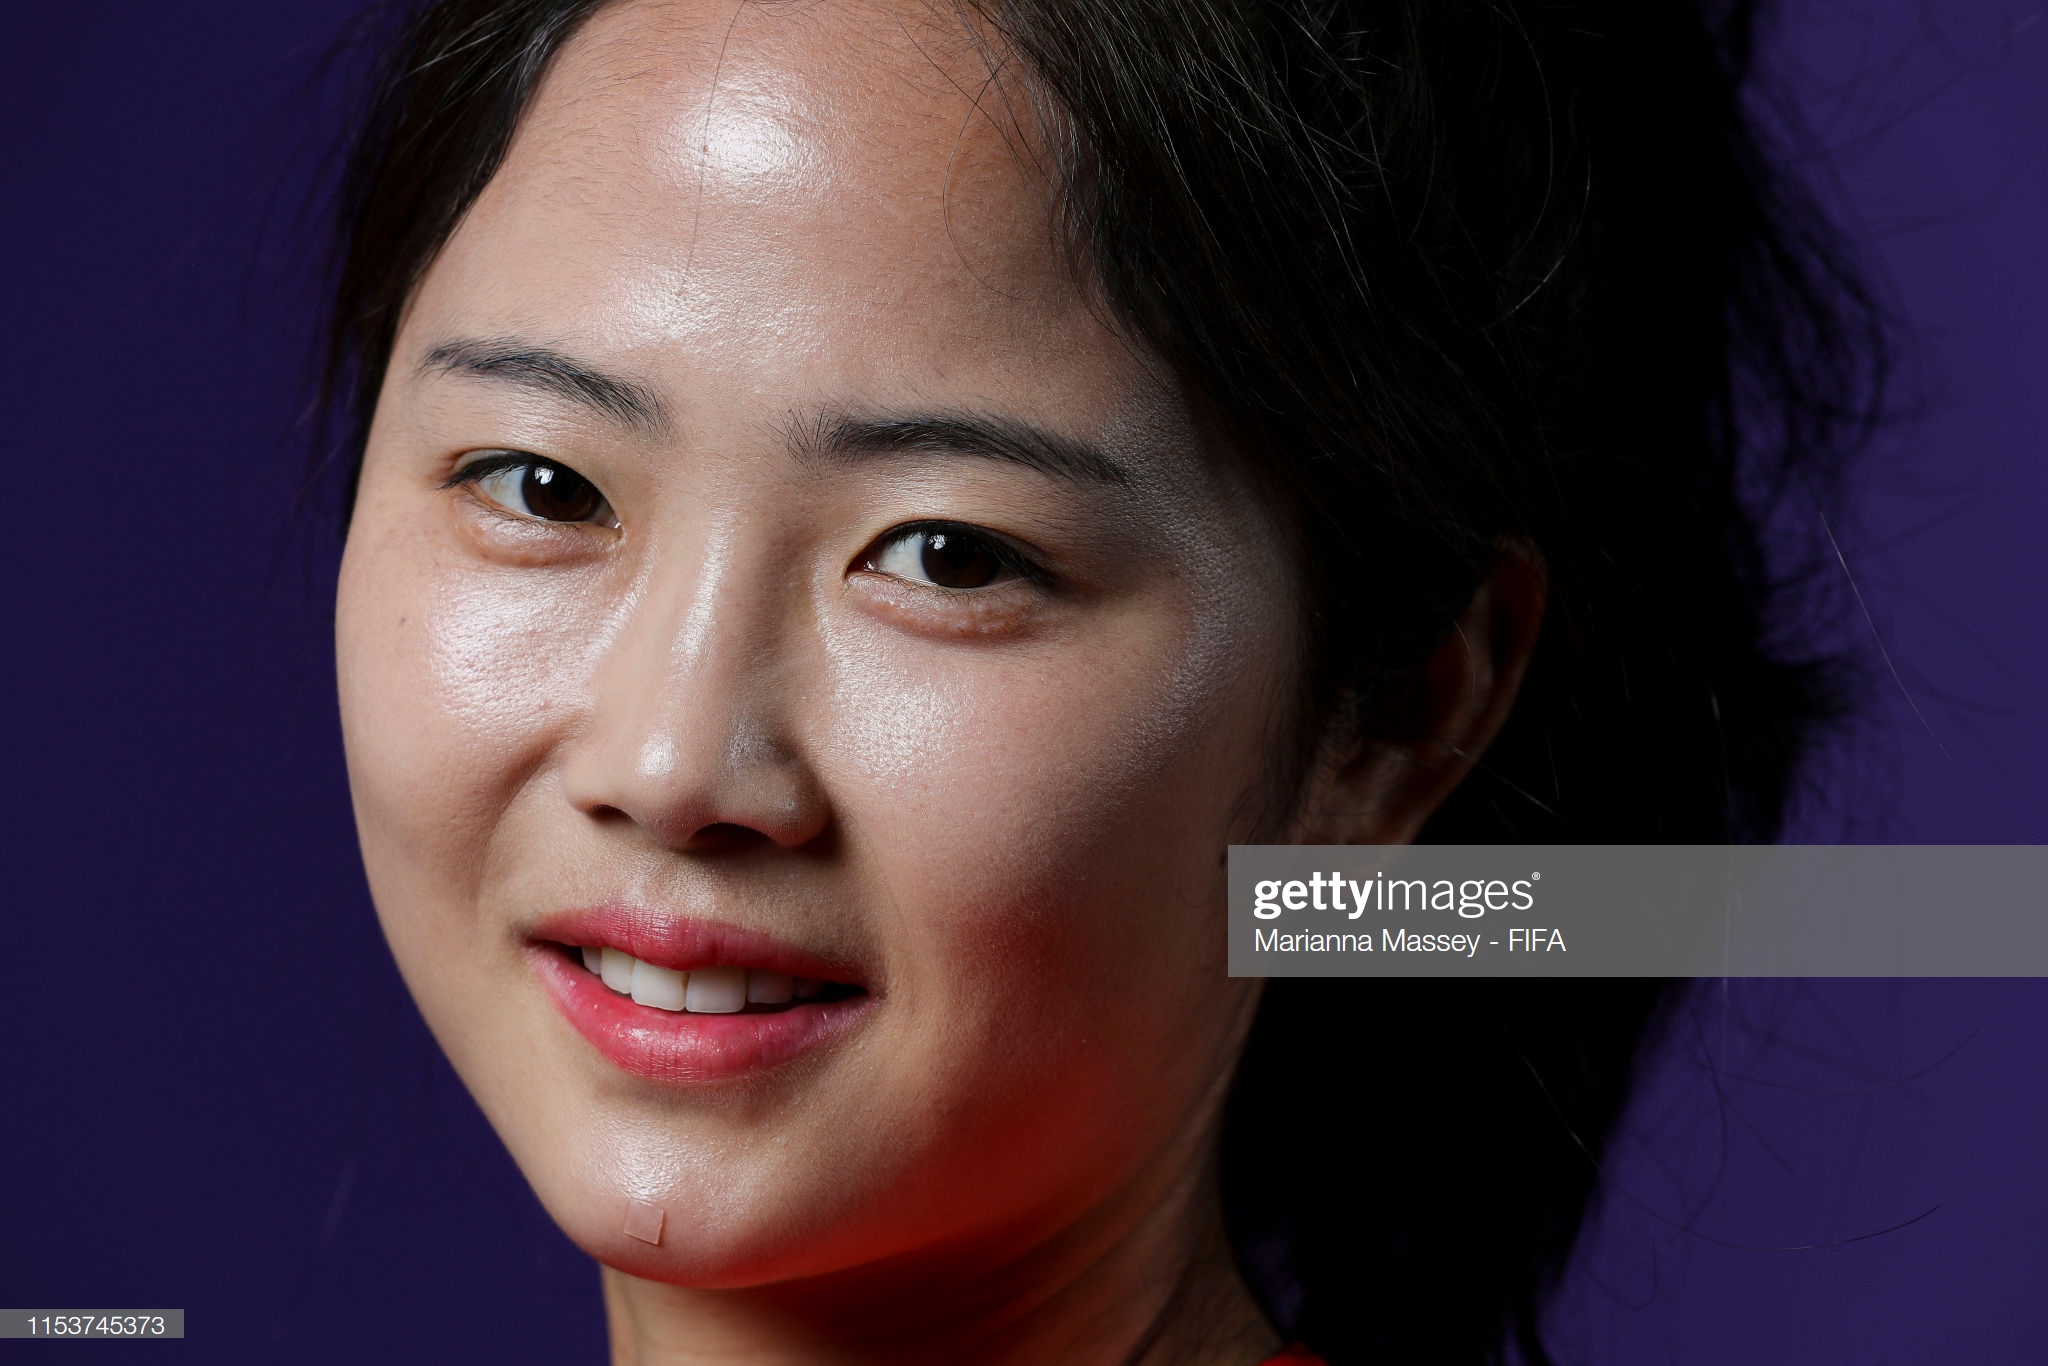 gettyimages-1153745373-2048x2048.jpg